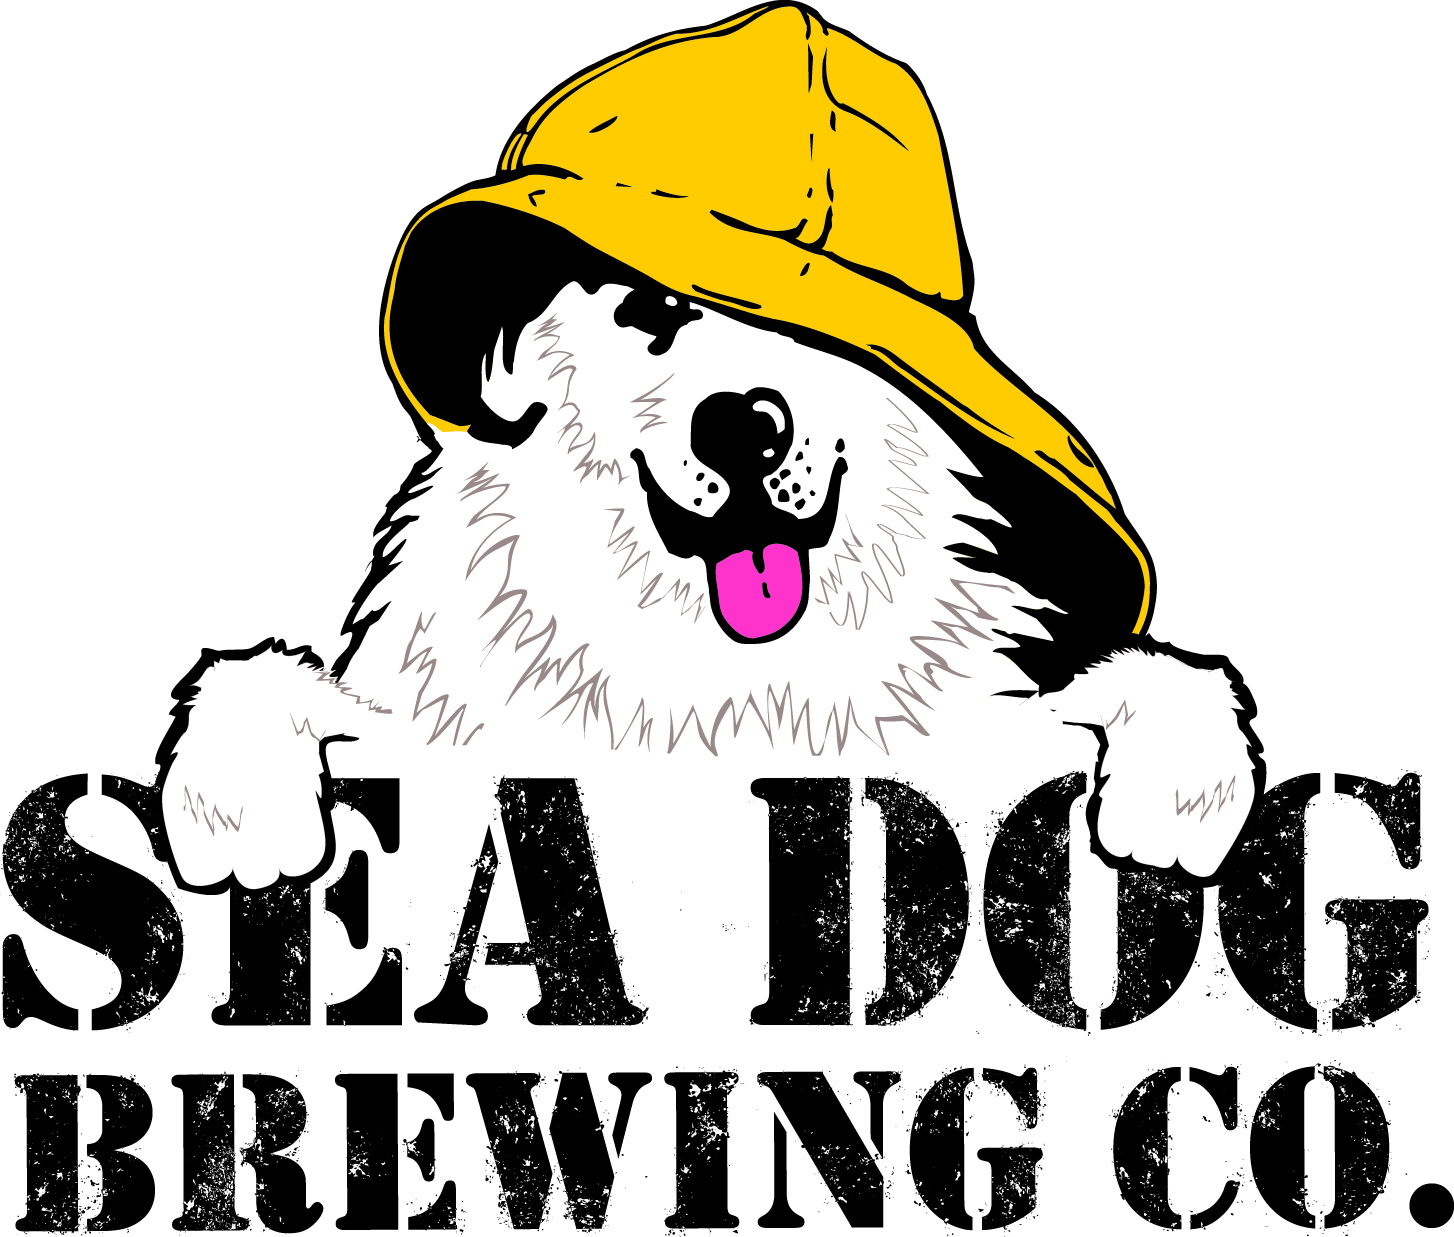 Sea Dog Brewing Company has pubs in Florida (Orlando, Clearwater) and Maine (South Portland, Topsham, and Bangor).